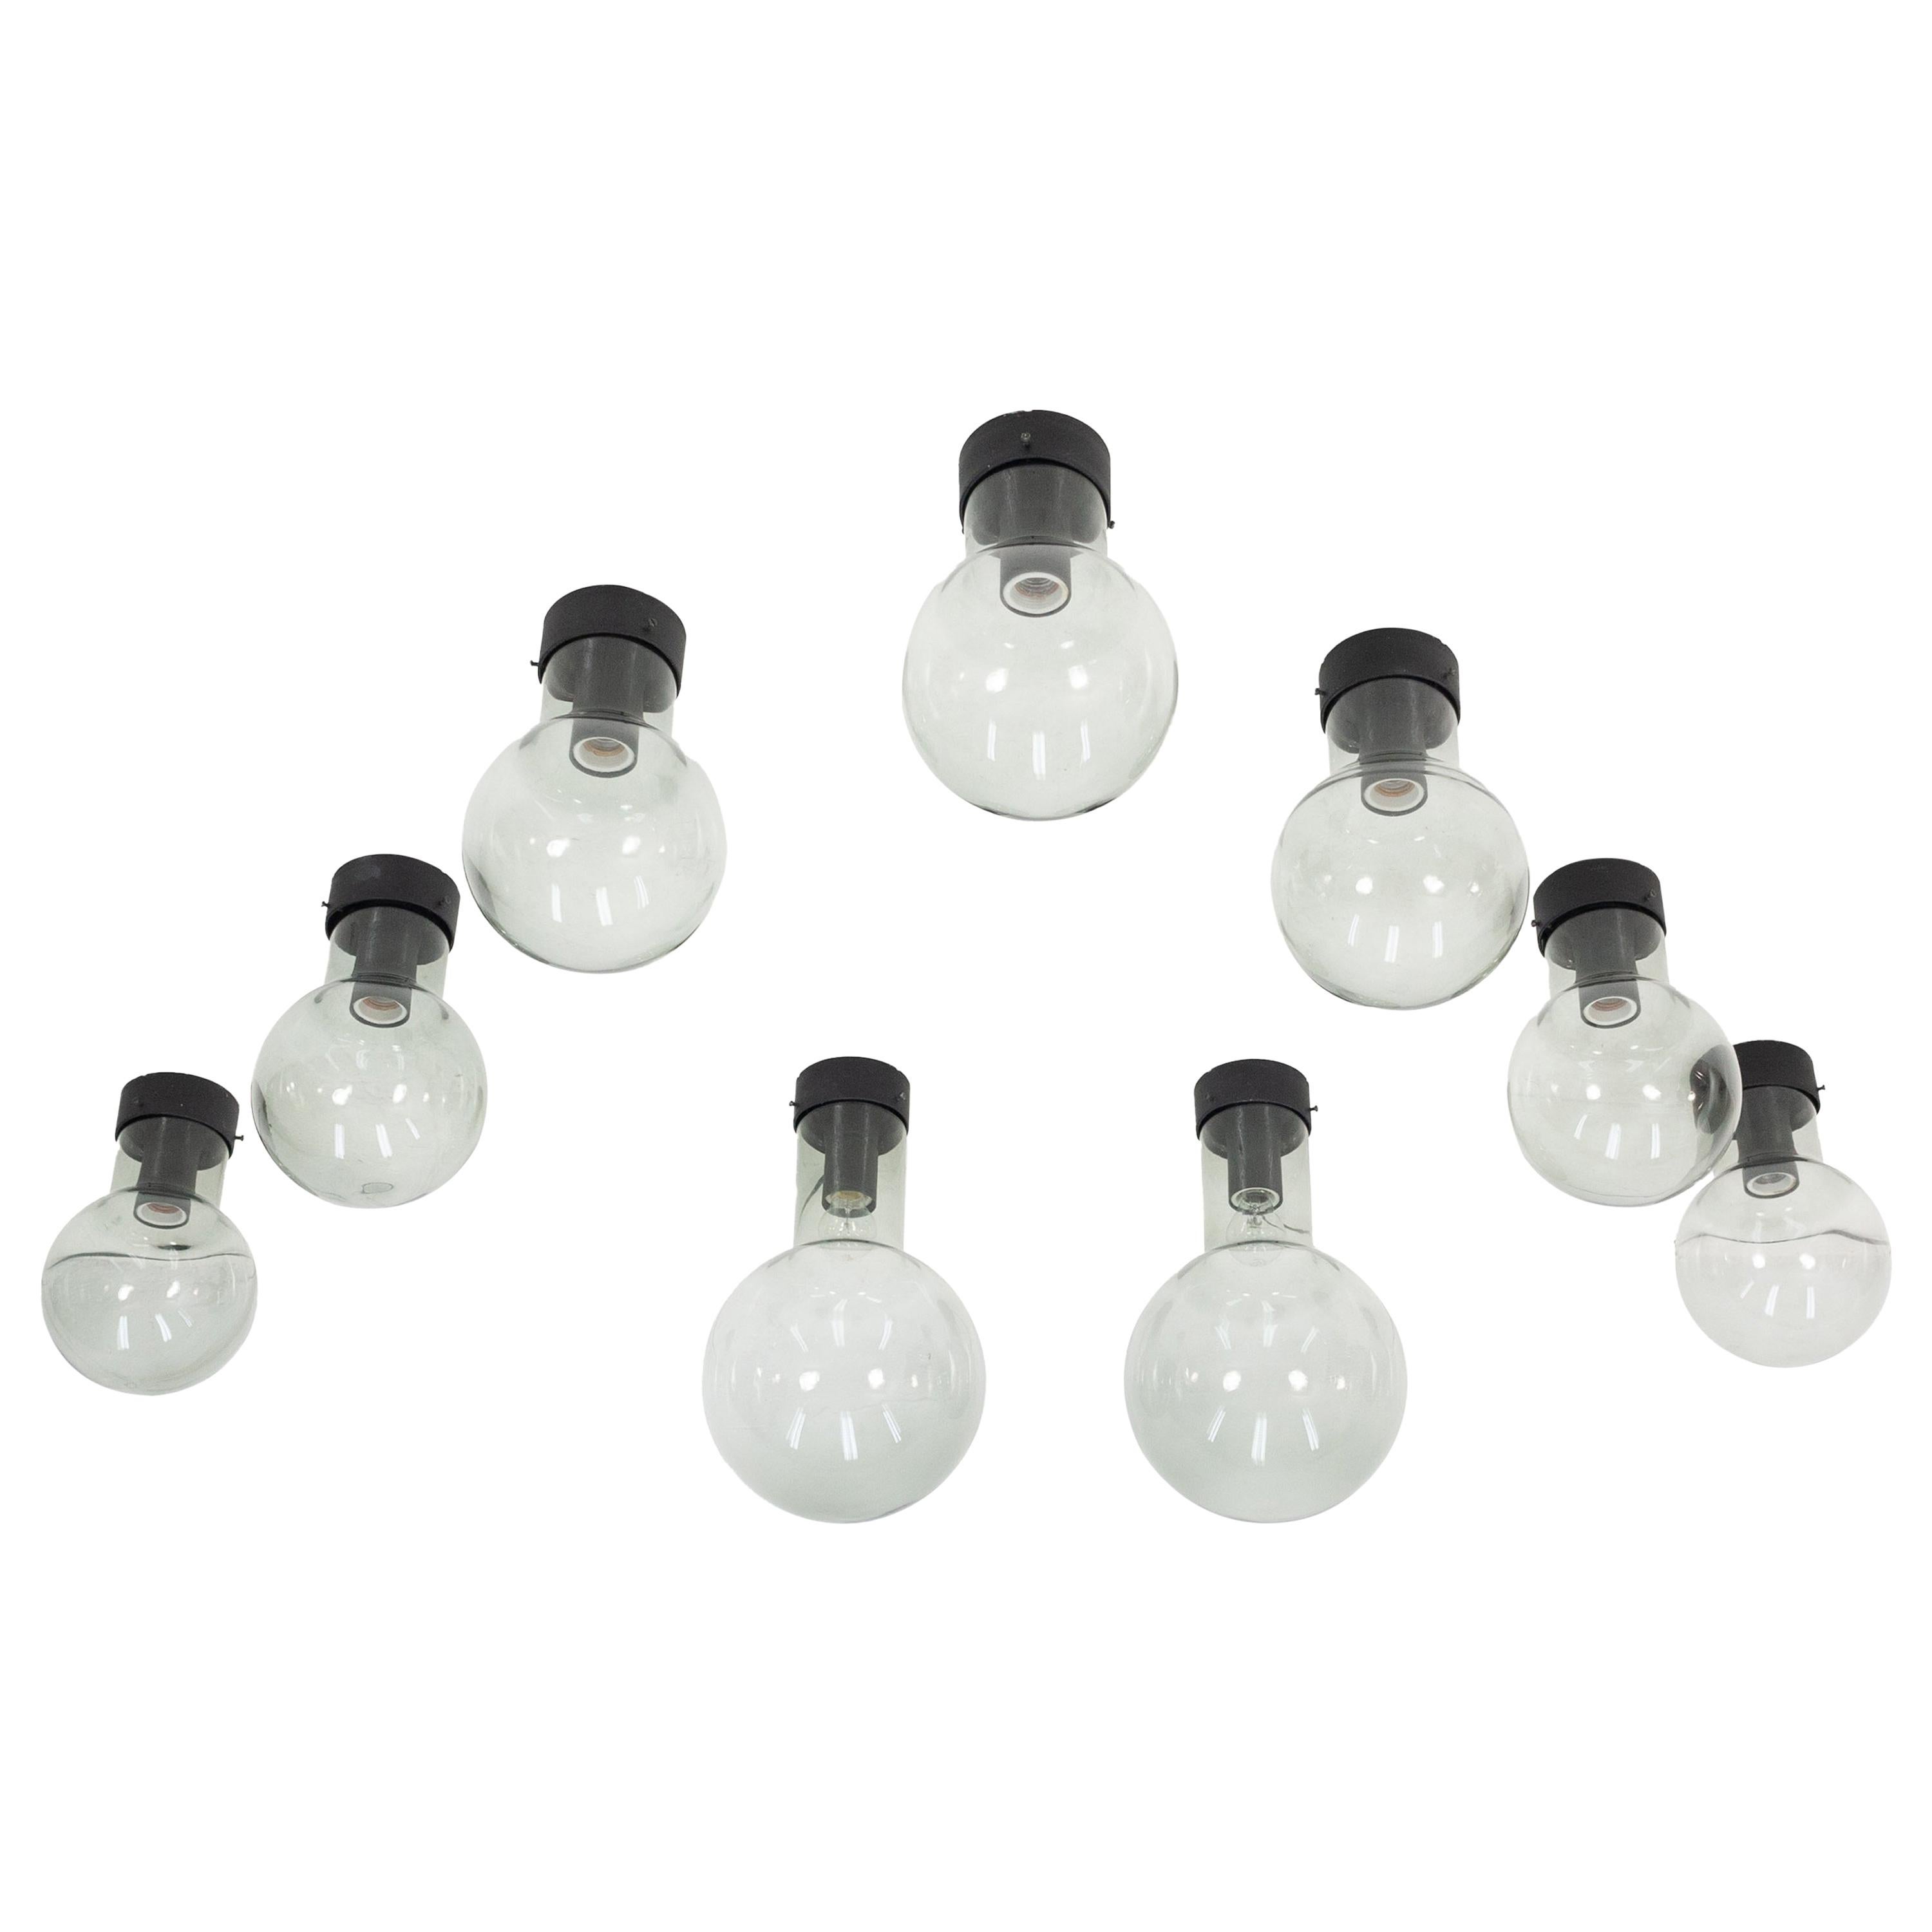 RAAK Amsterdam Globe Pendant Lamps 8 Pieces Outdoor and Indoor Use